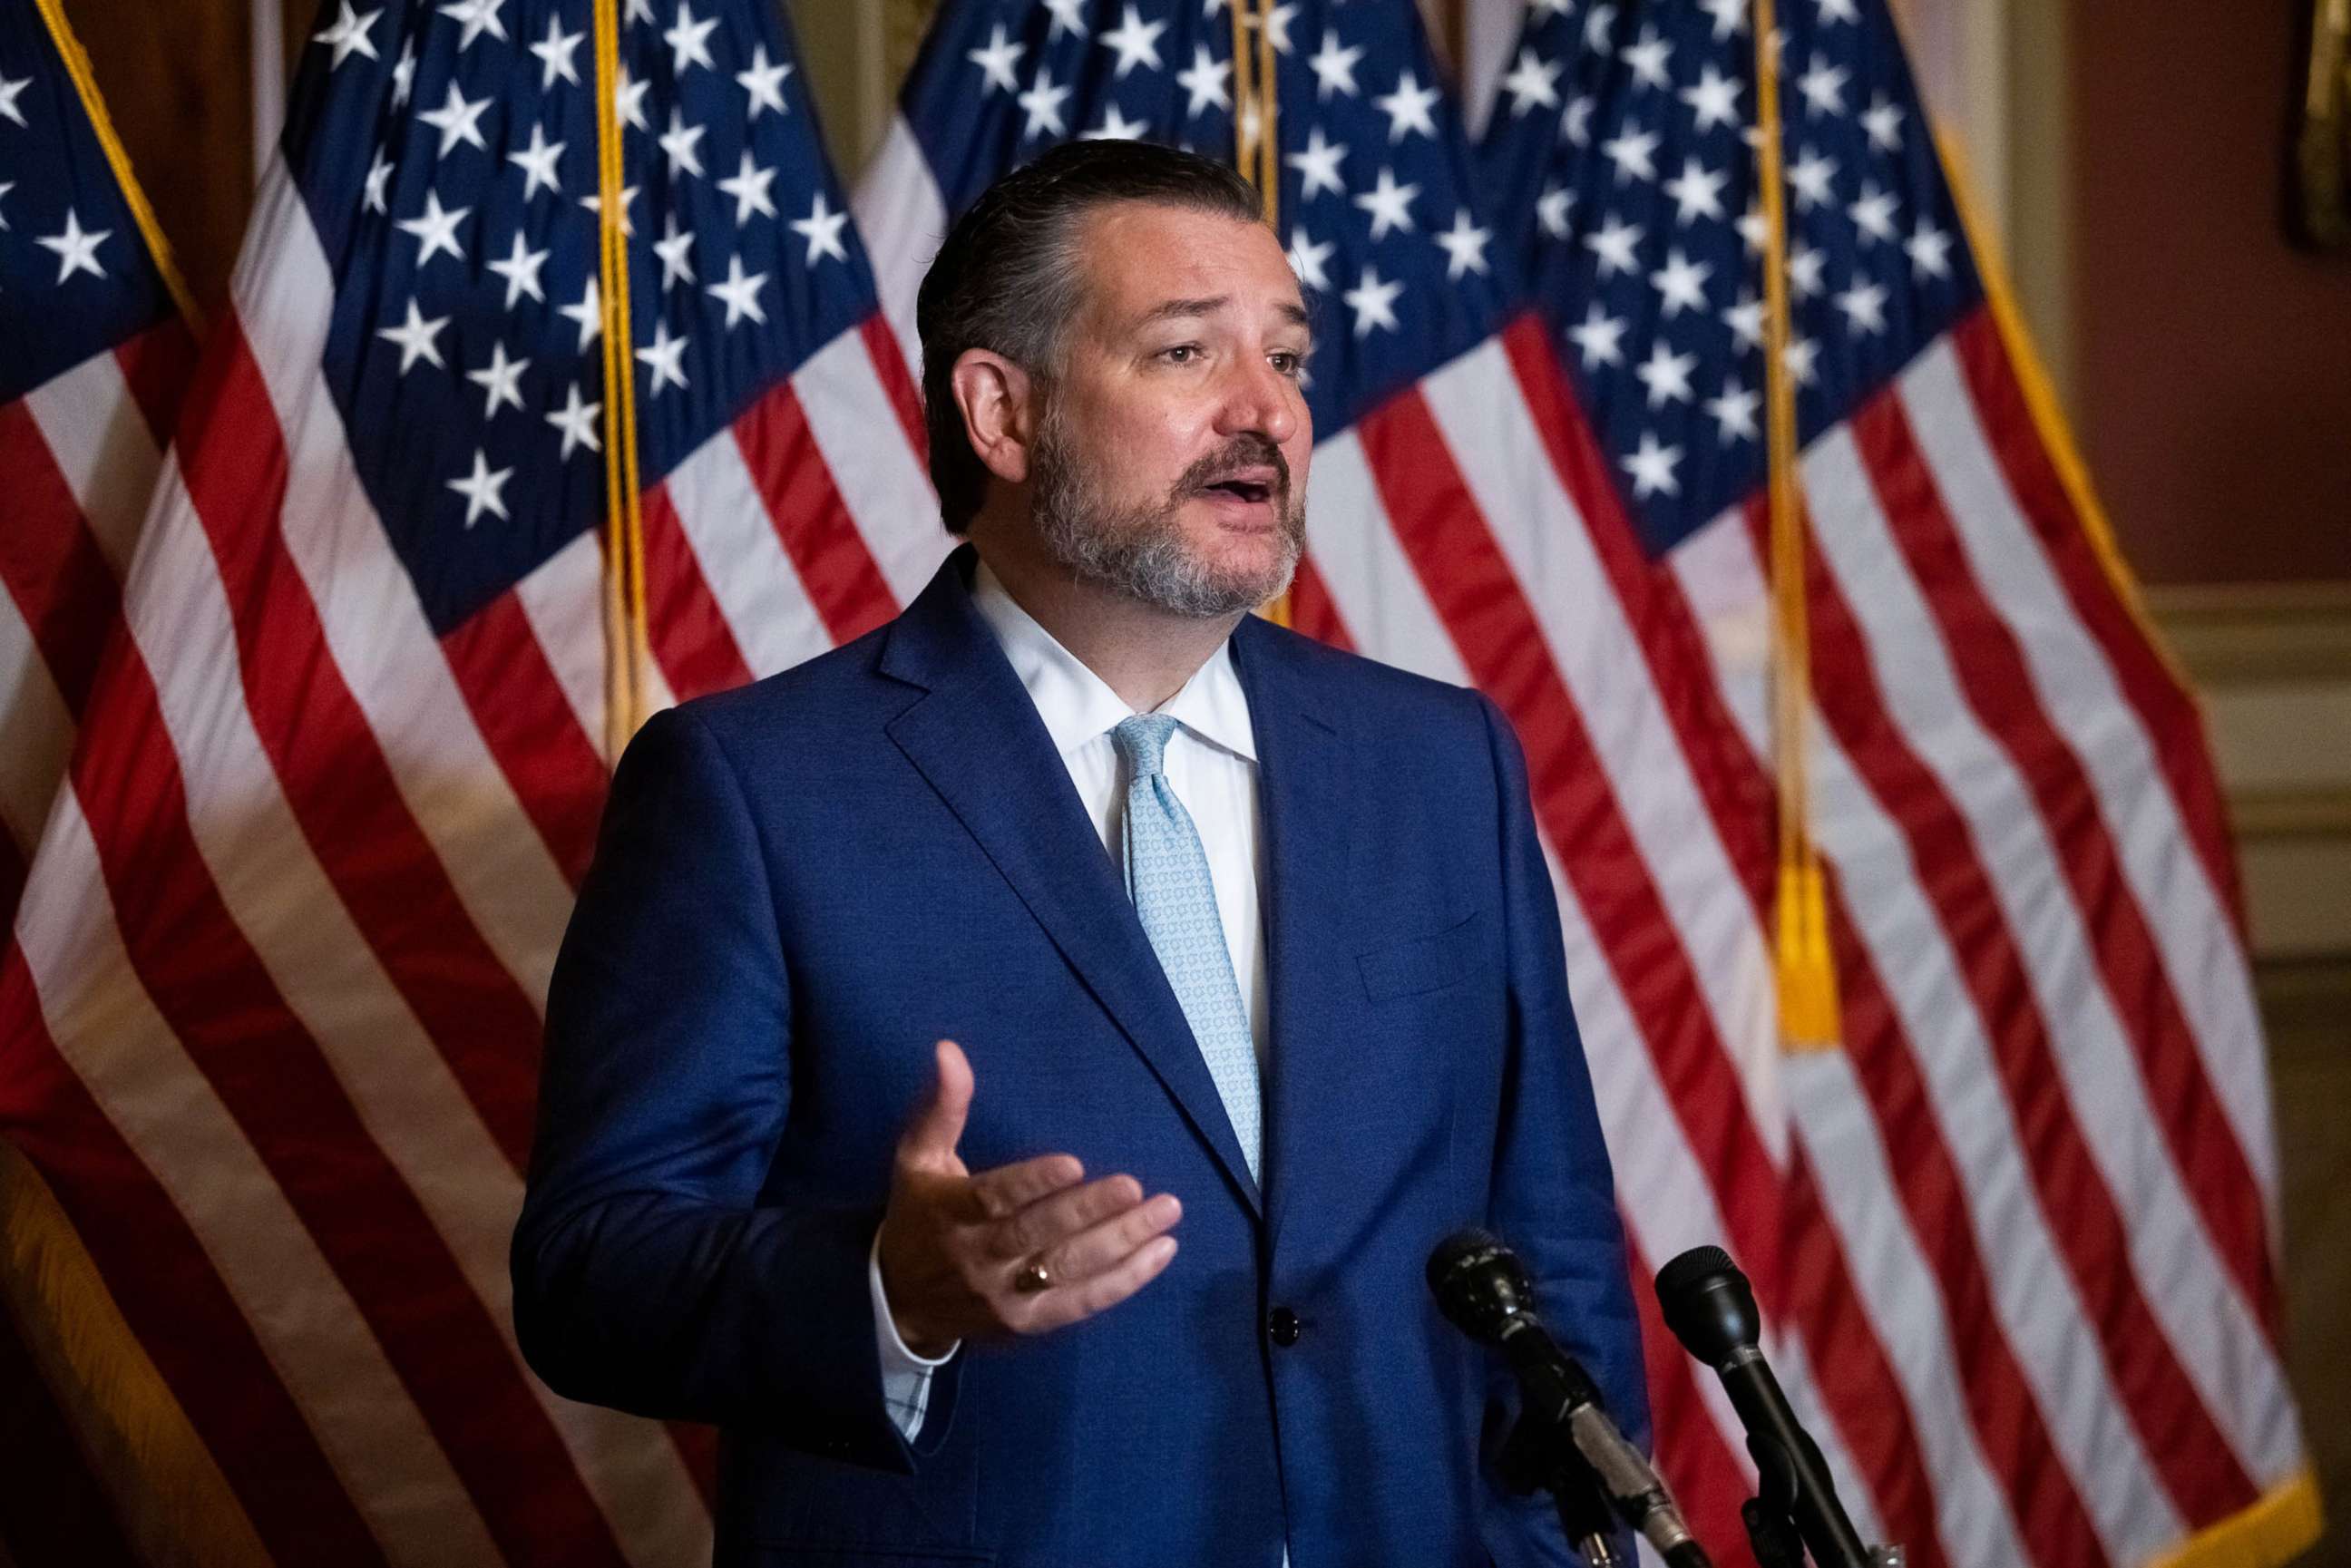 PHOTO: Senator Ted Cruz speaks during a news conference on Capitol Hill, in Washington, D.C., Oct. 26, 2020.